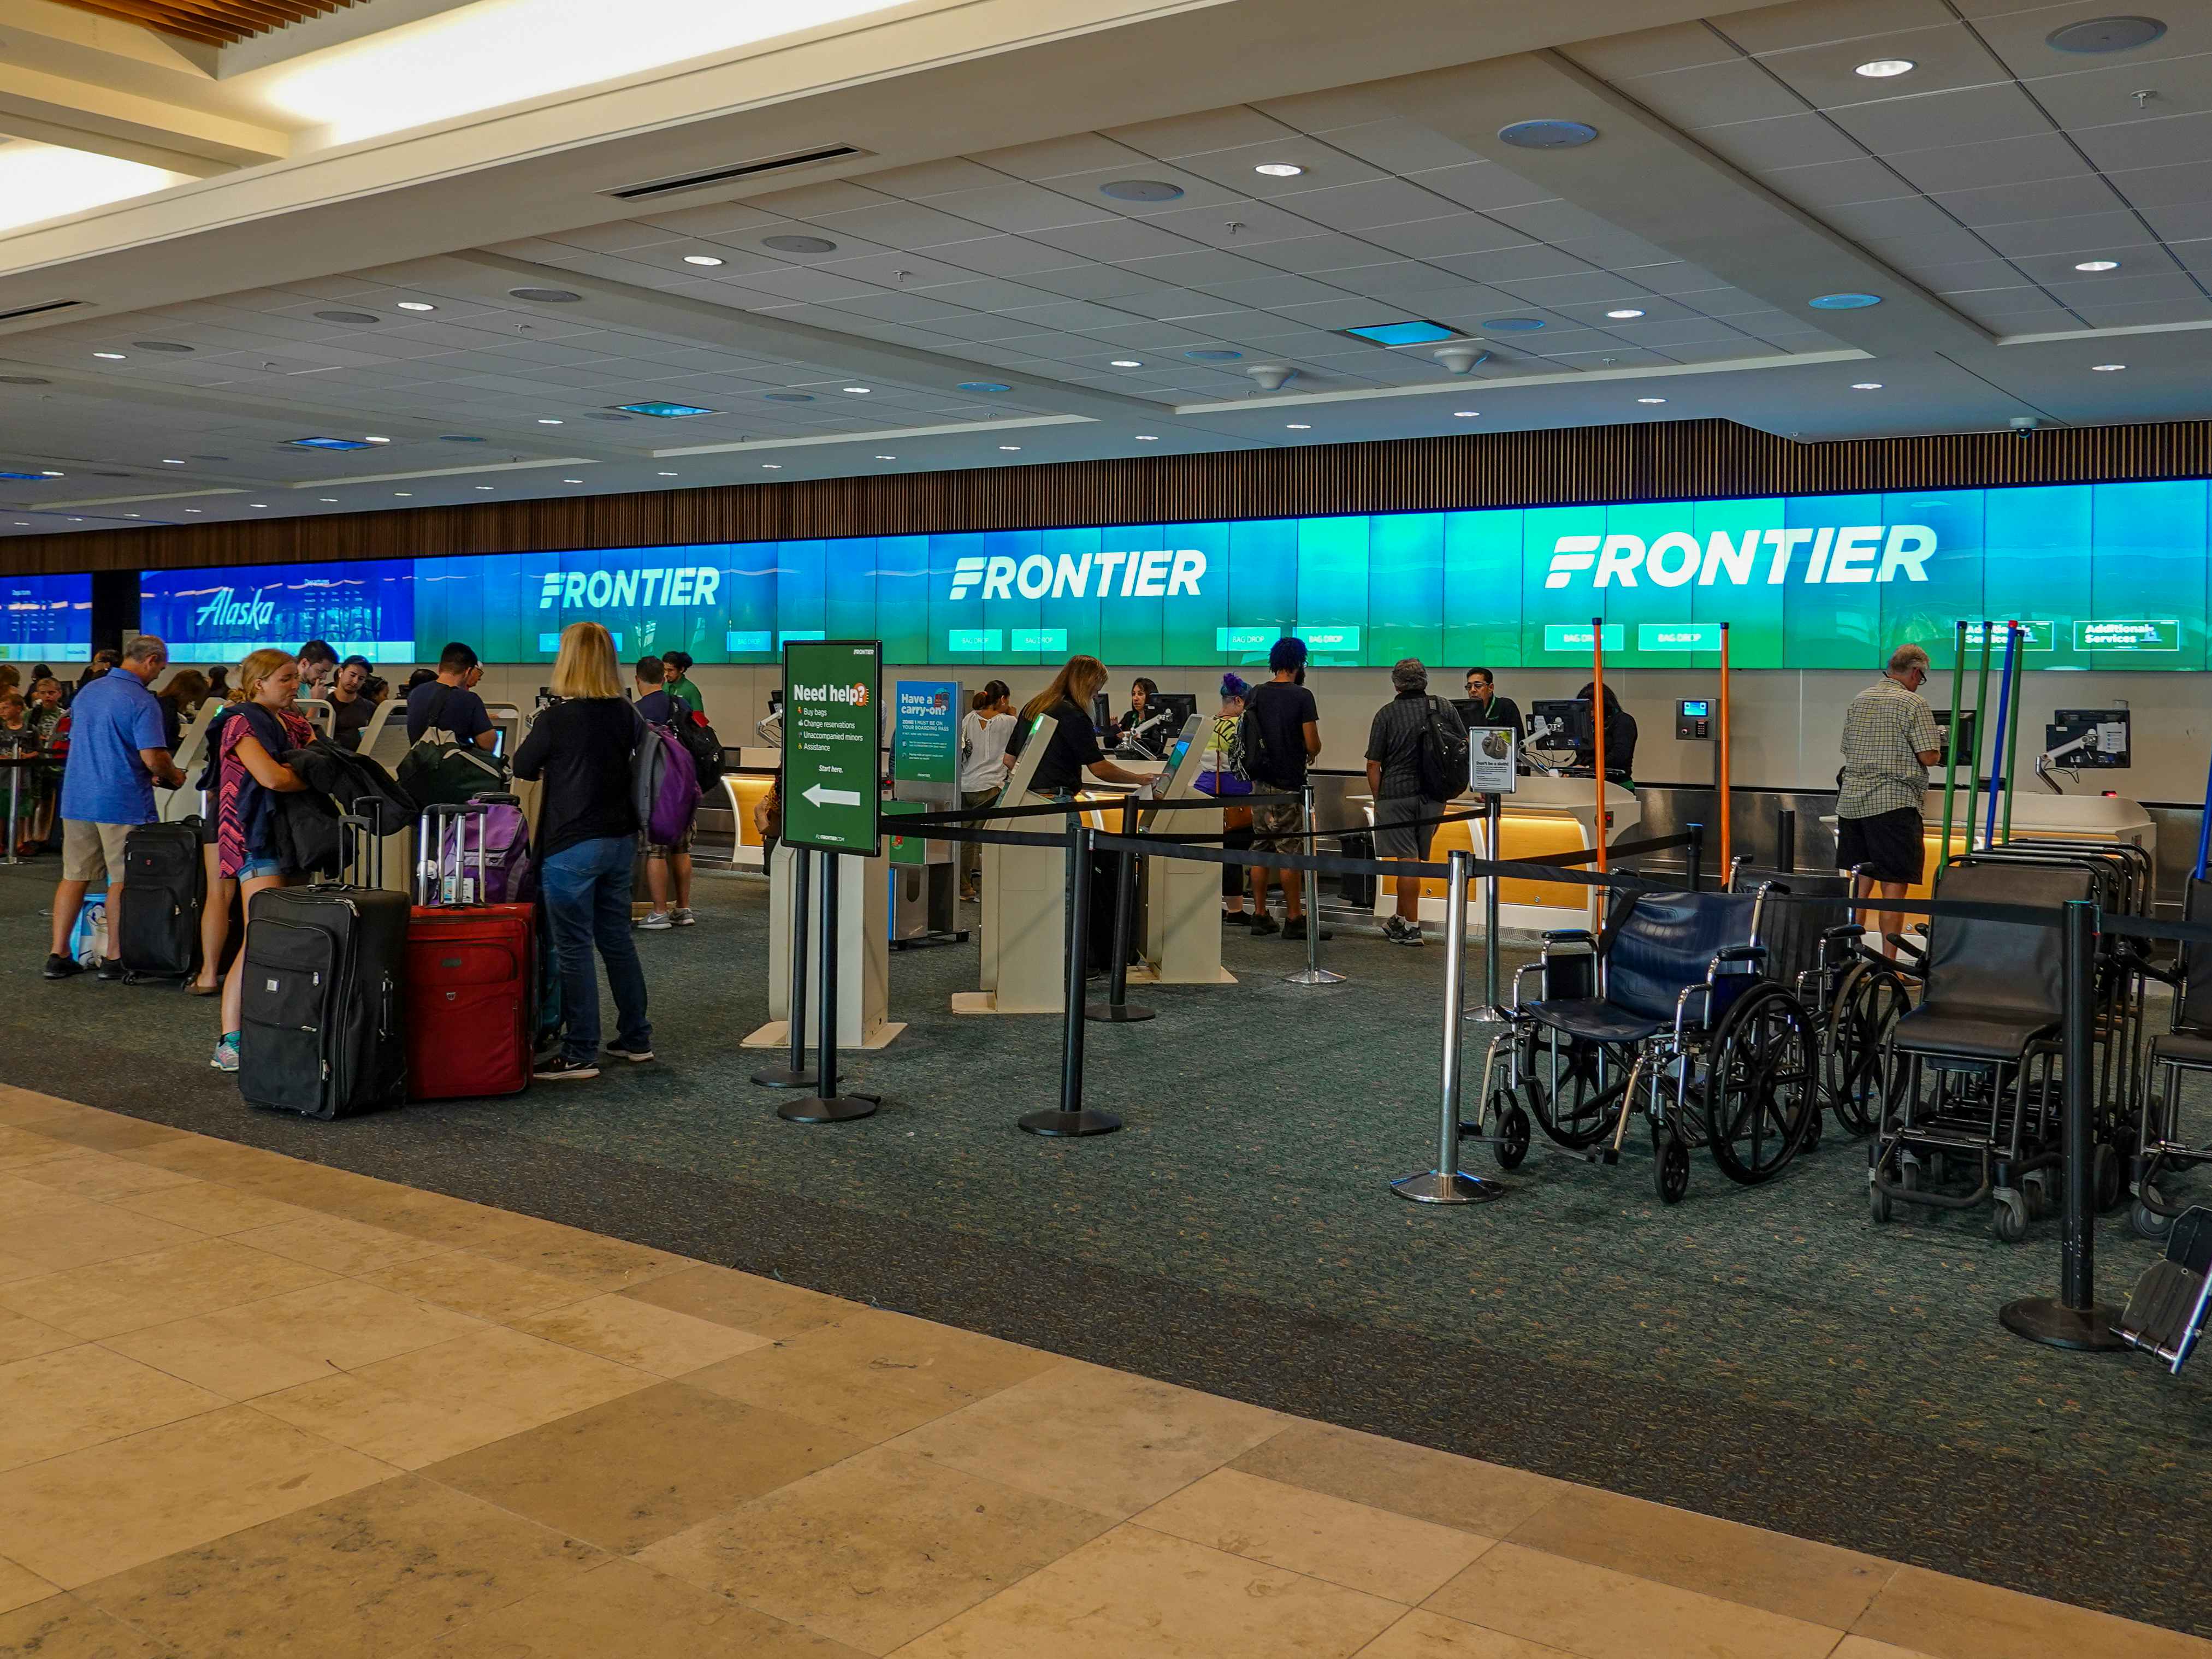 People standing near the check-in desks for Frontier in the airport.